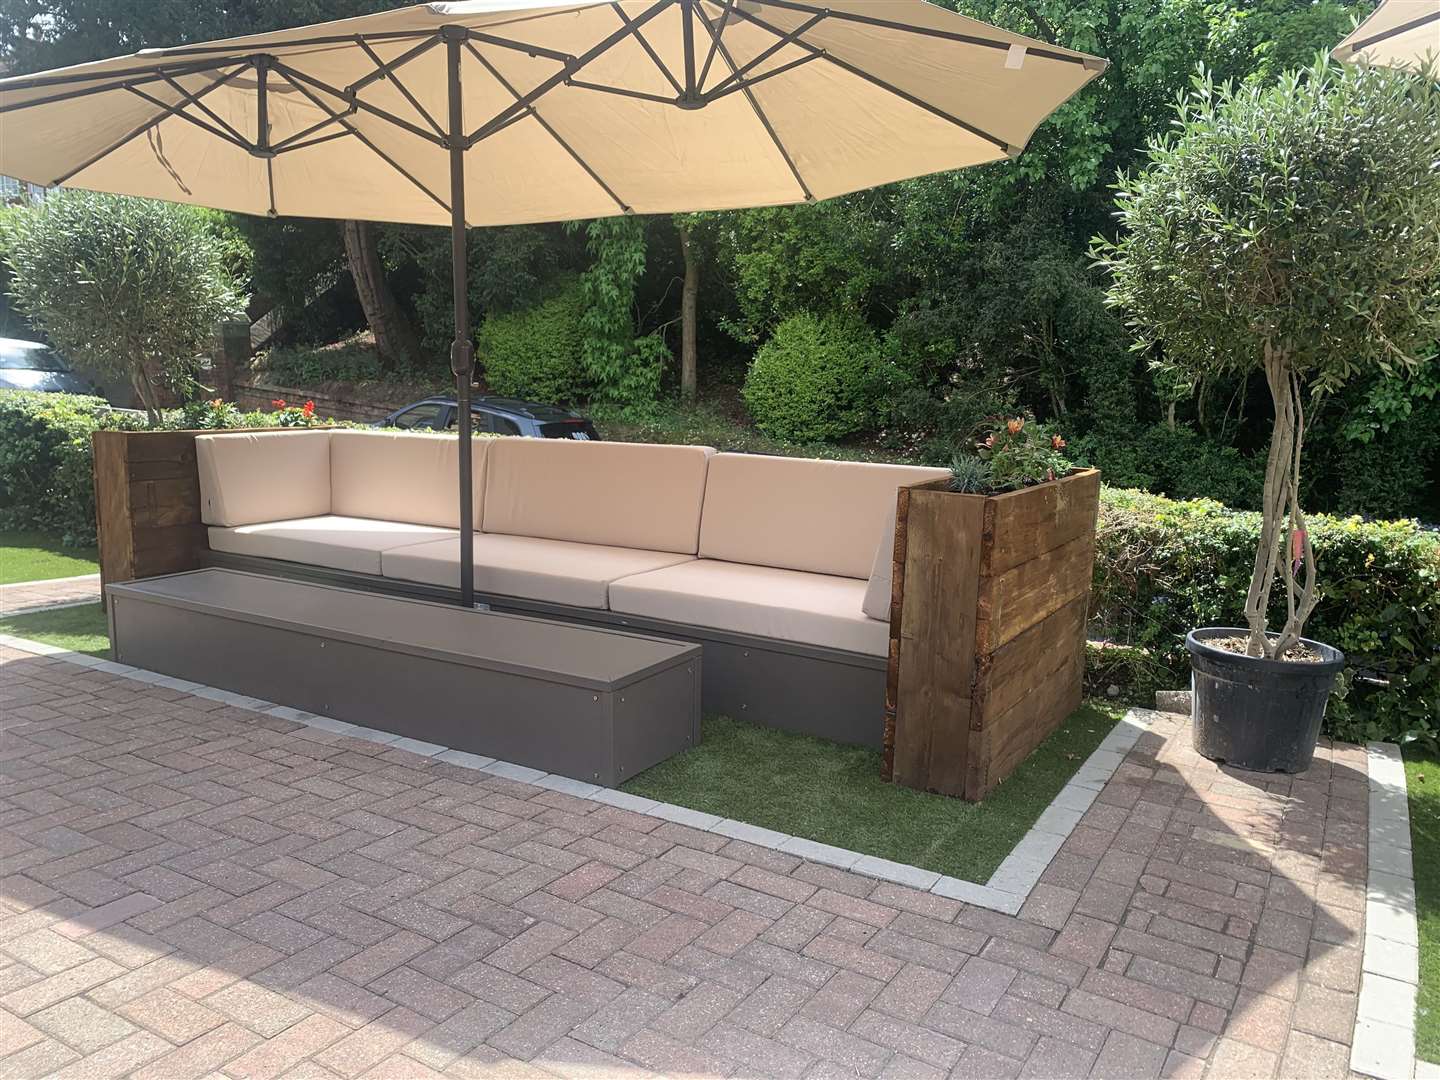 Up to 40 people can be catered for a new outdoor bar area